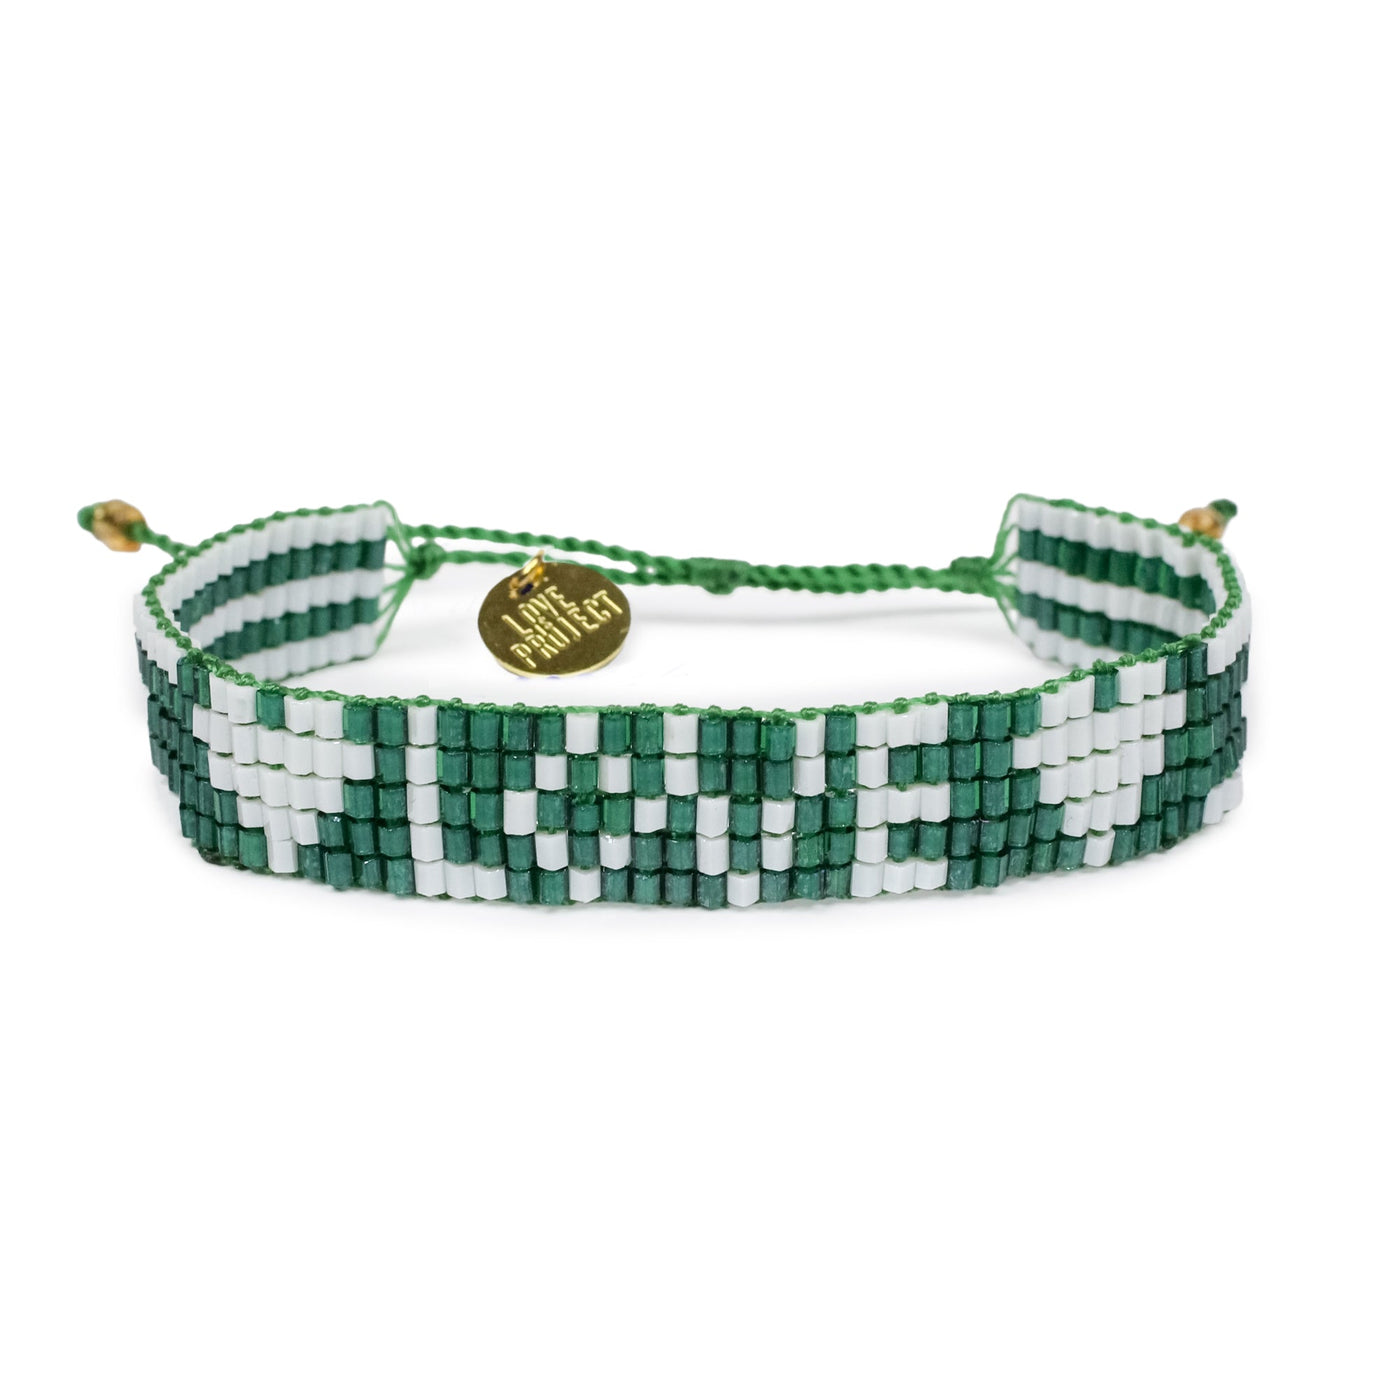 Seed Bead LOVE with Hearts Bracelet - Green and White